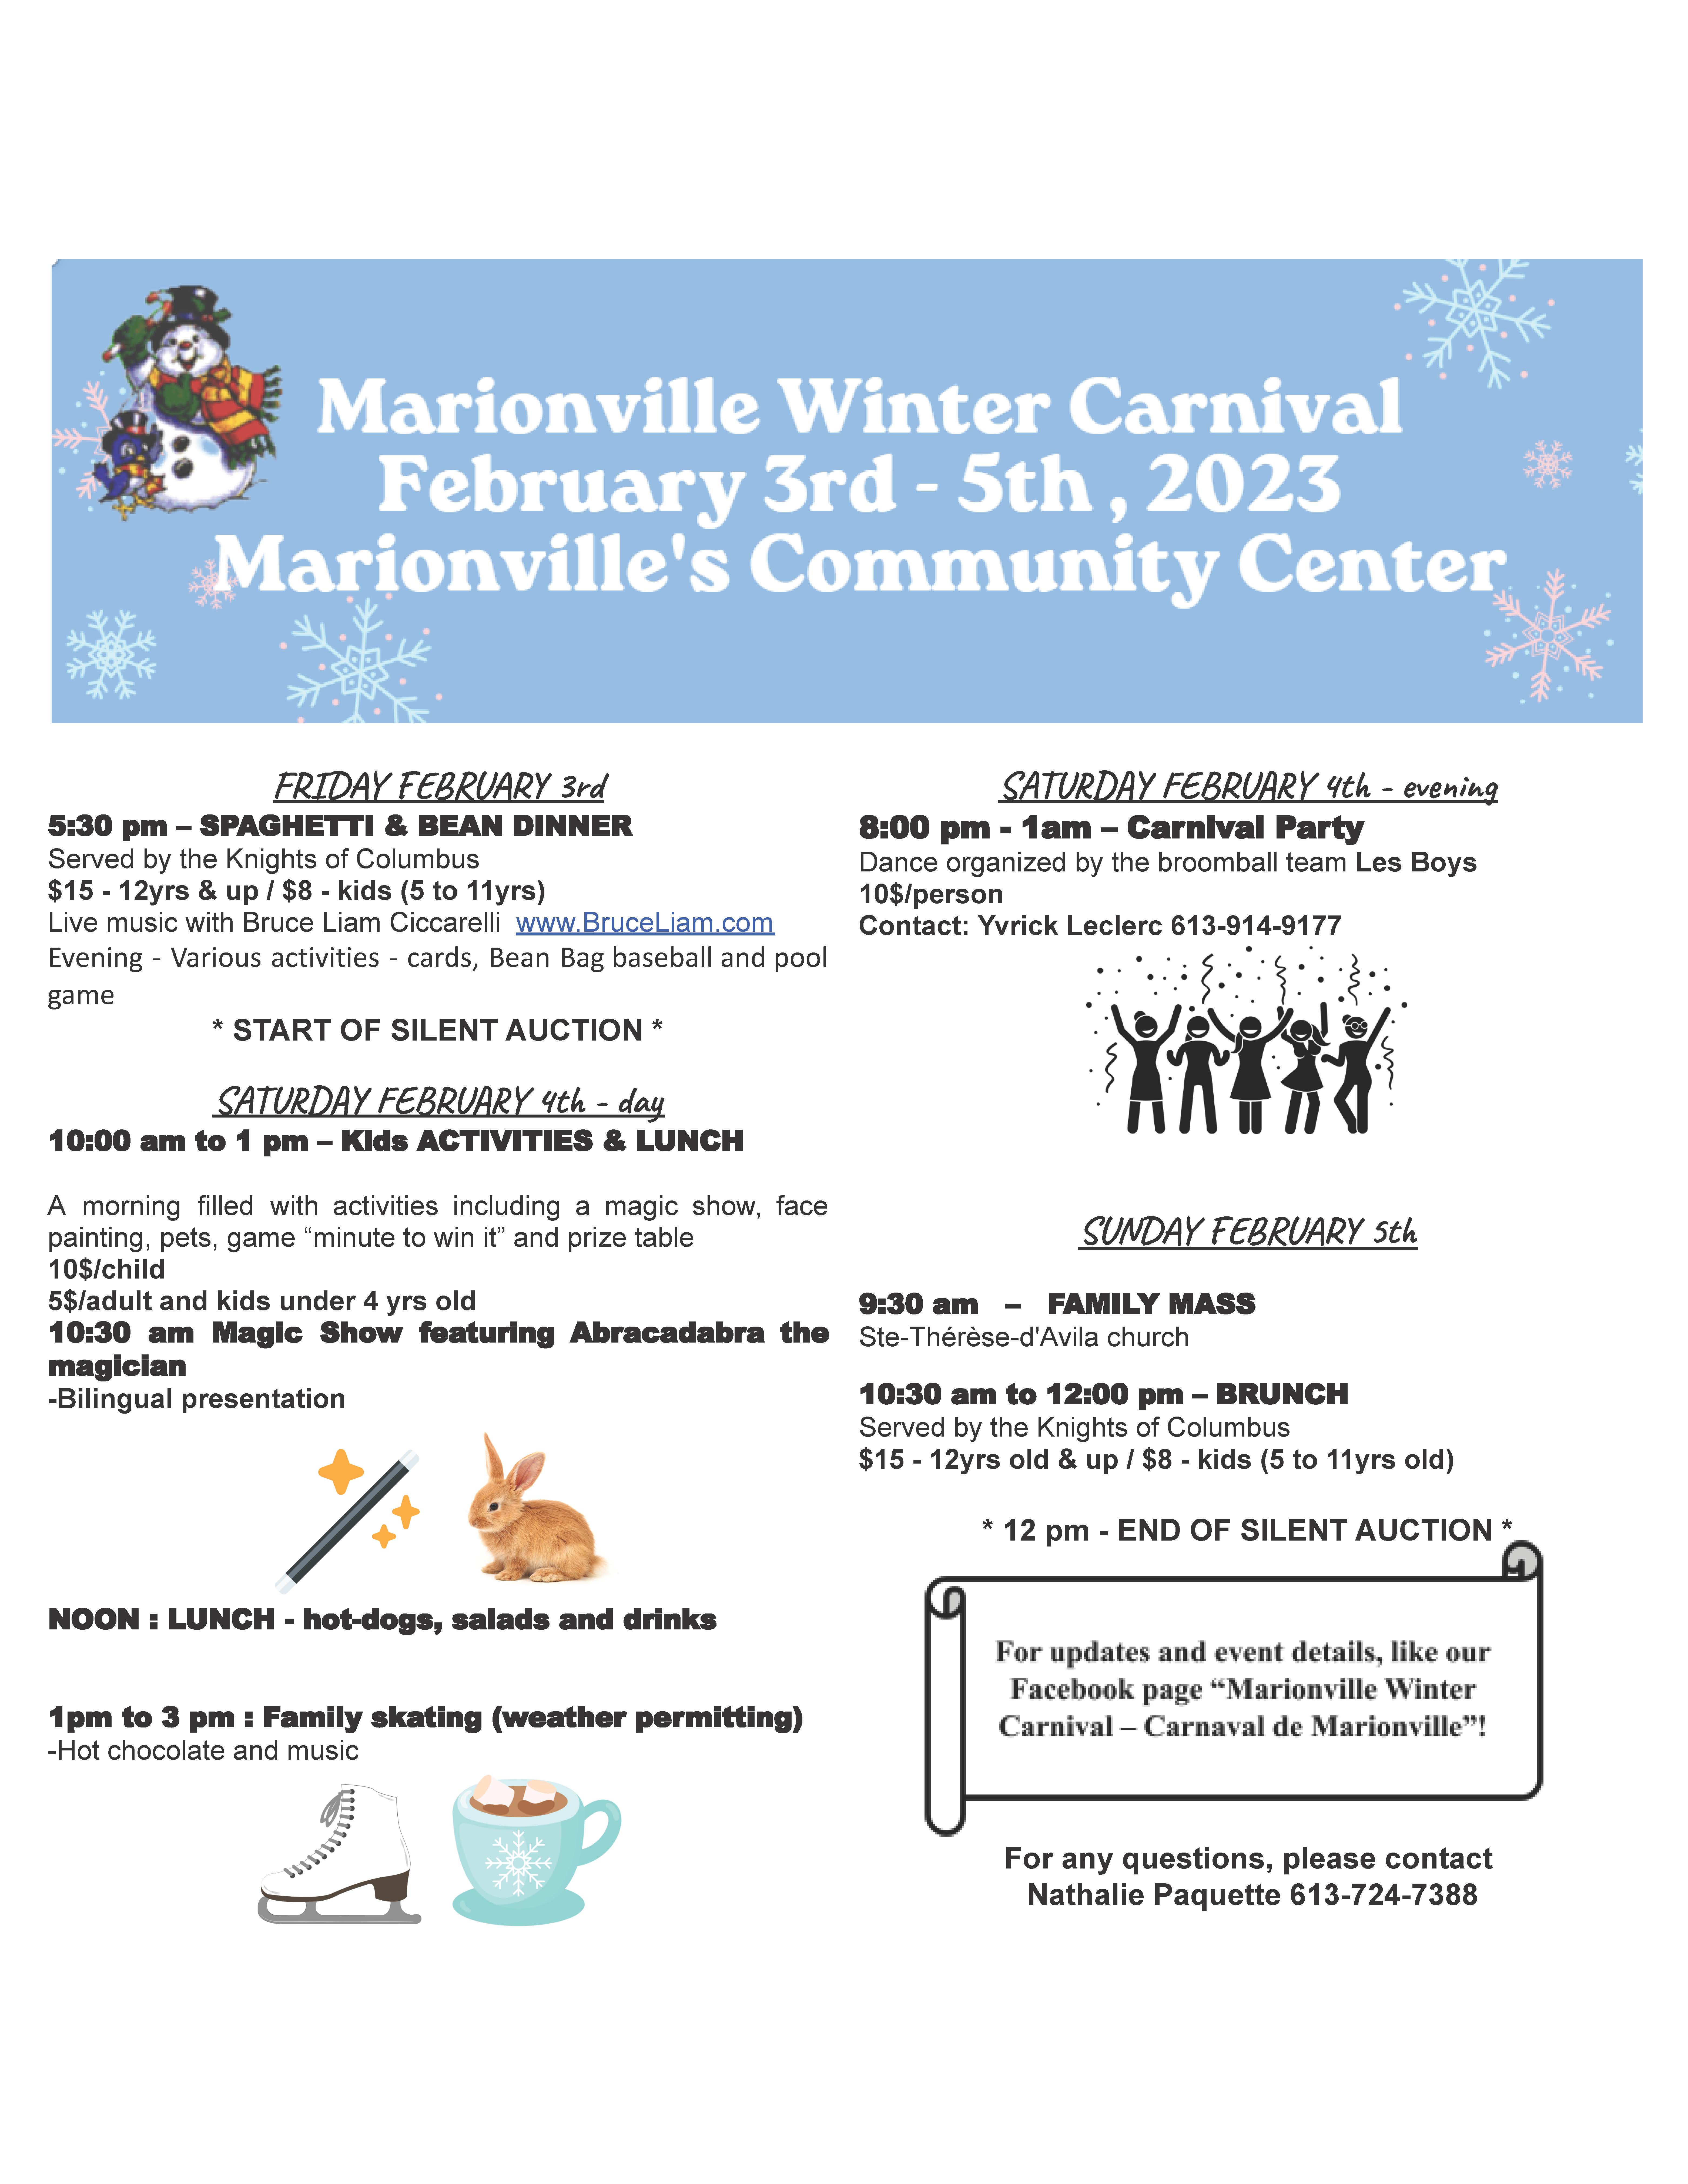 2023 Marionville Winter Carnival Poster with event details